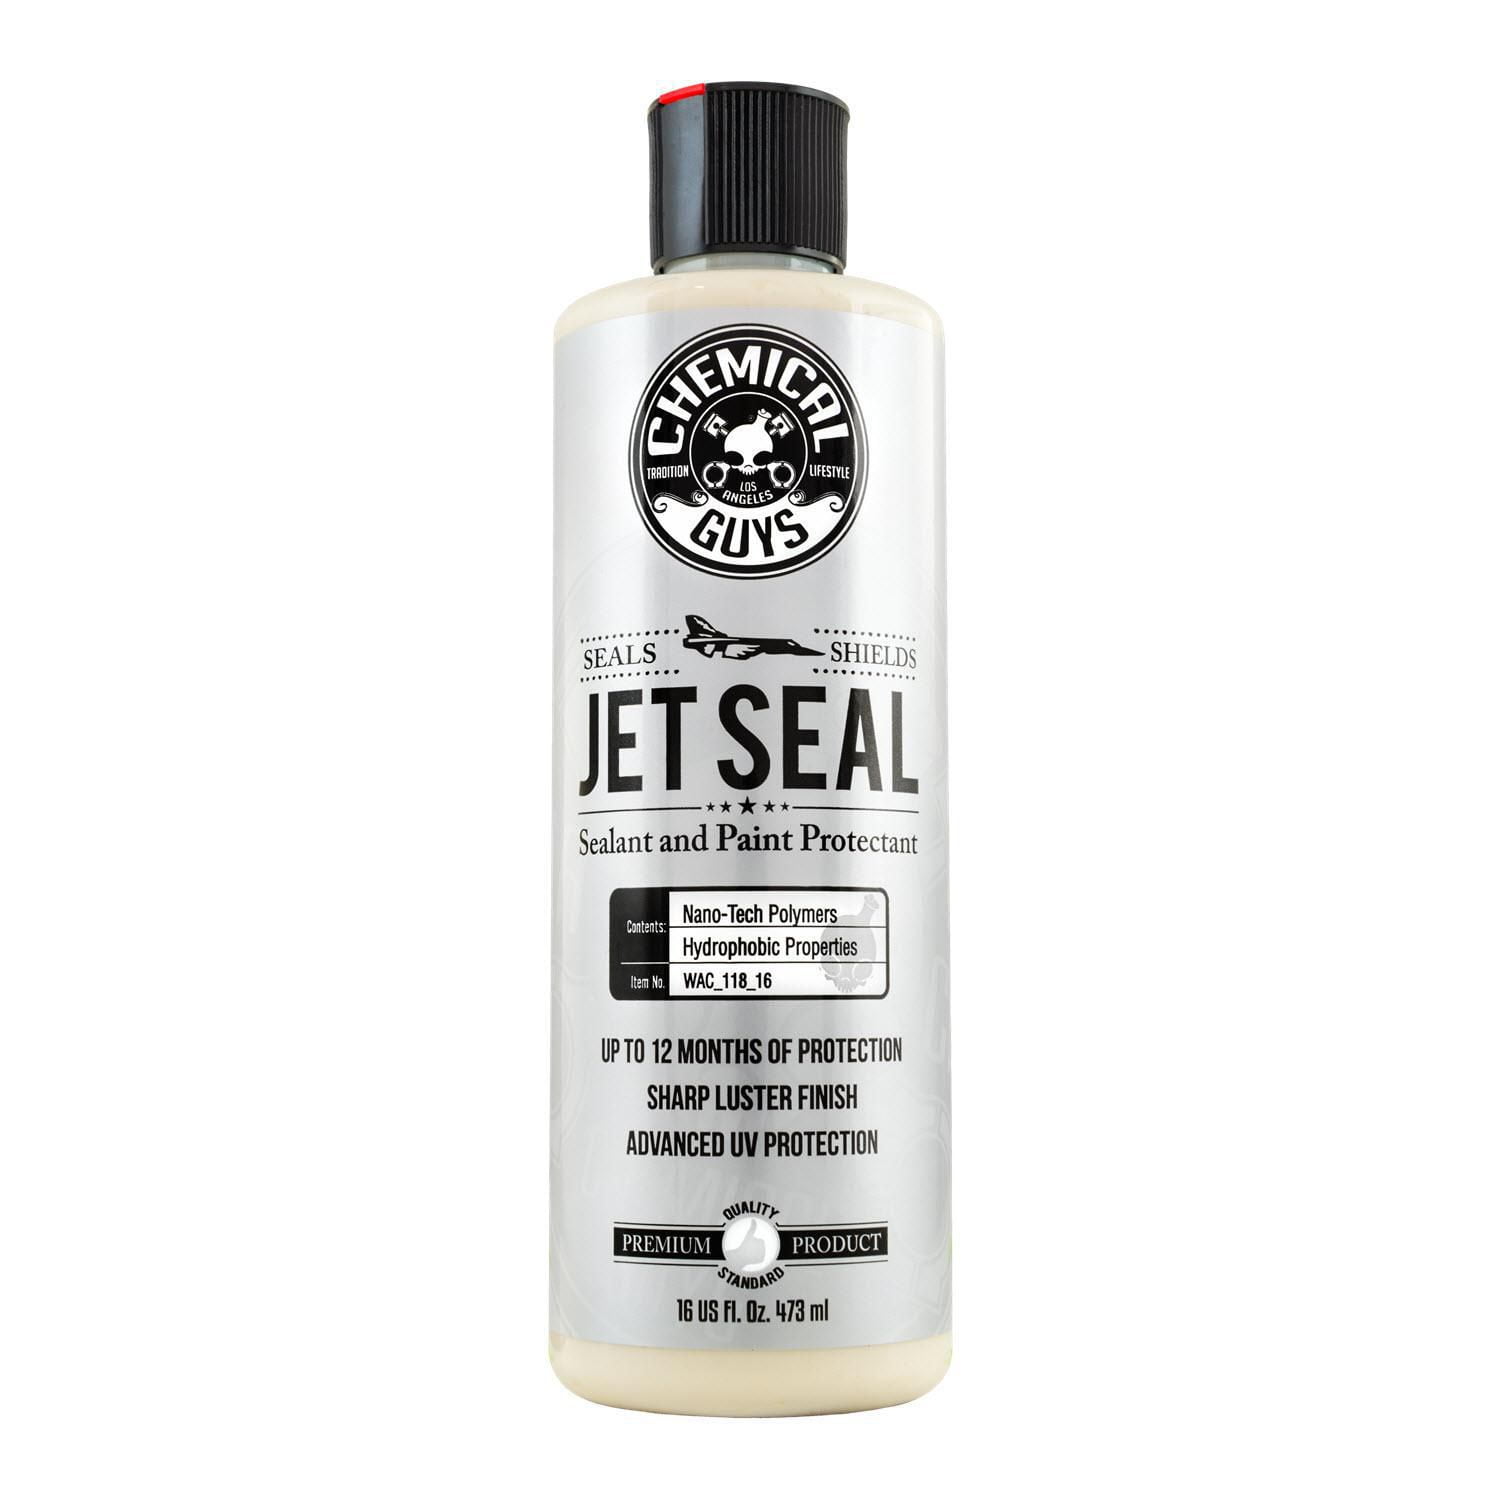 303 Aerospace Protectant - Superior UV Protection - Prevents